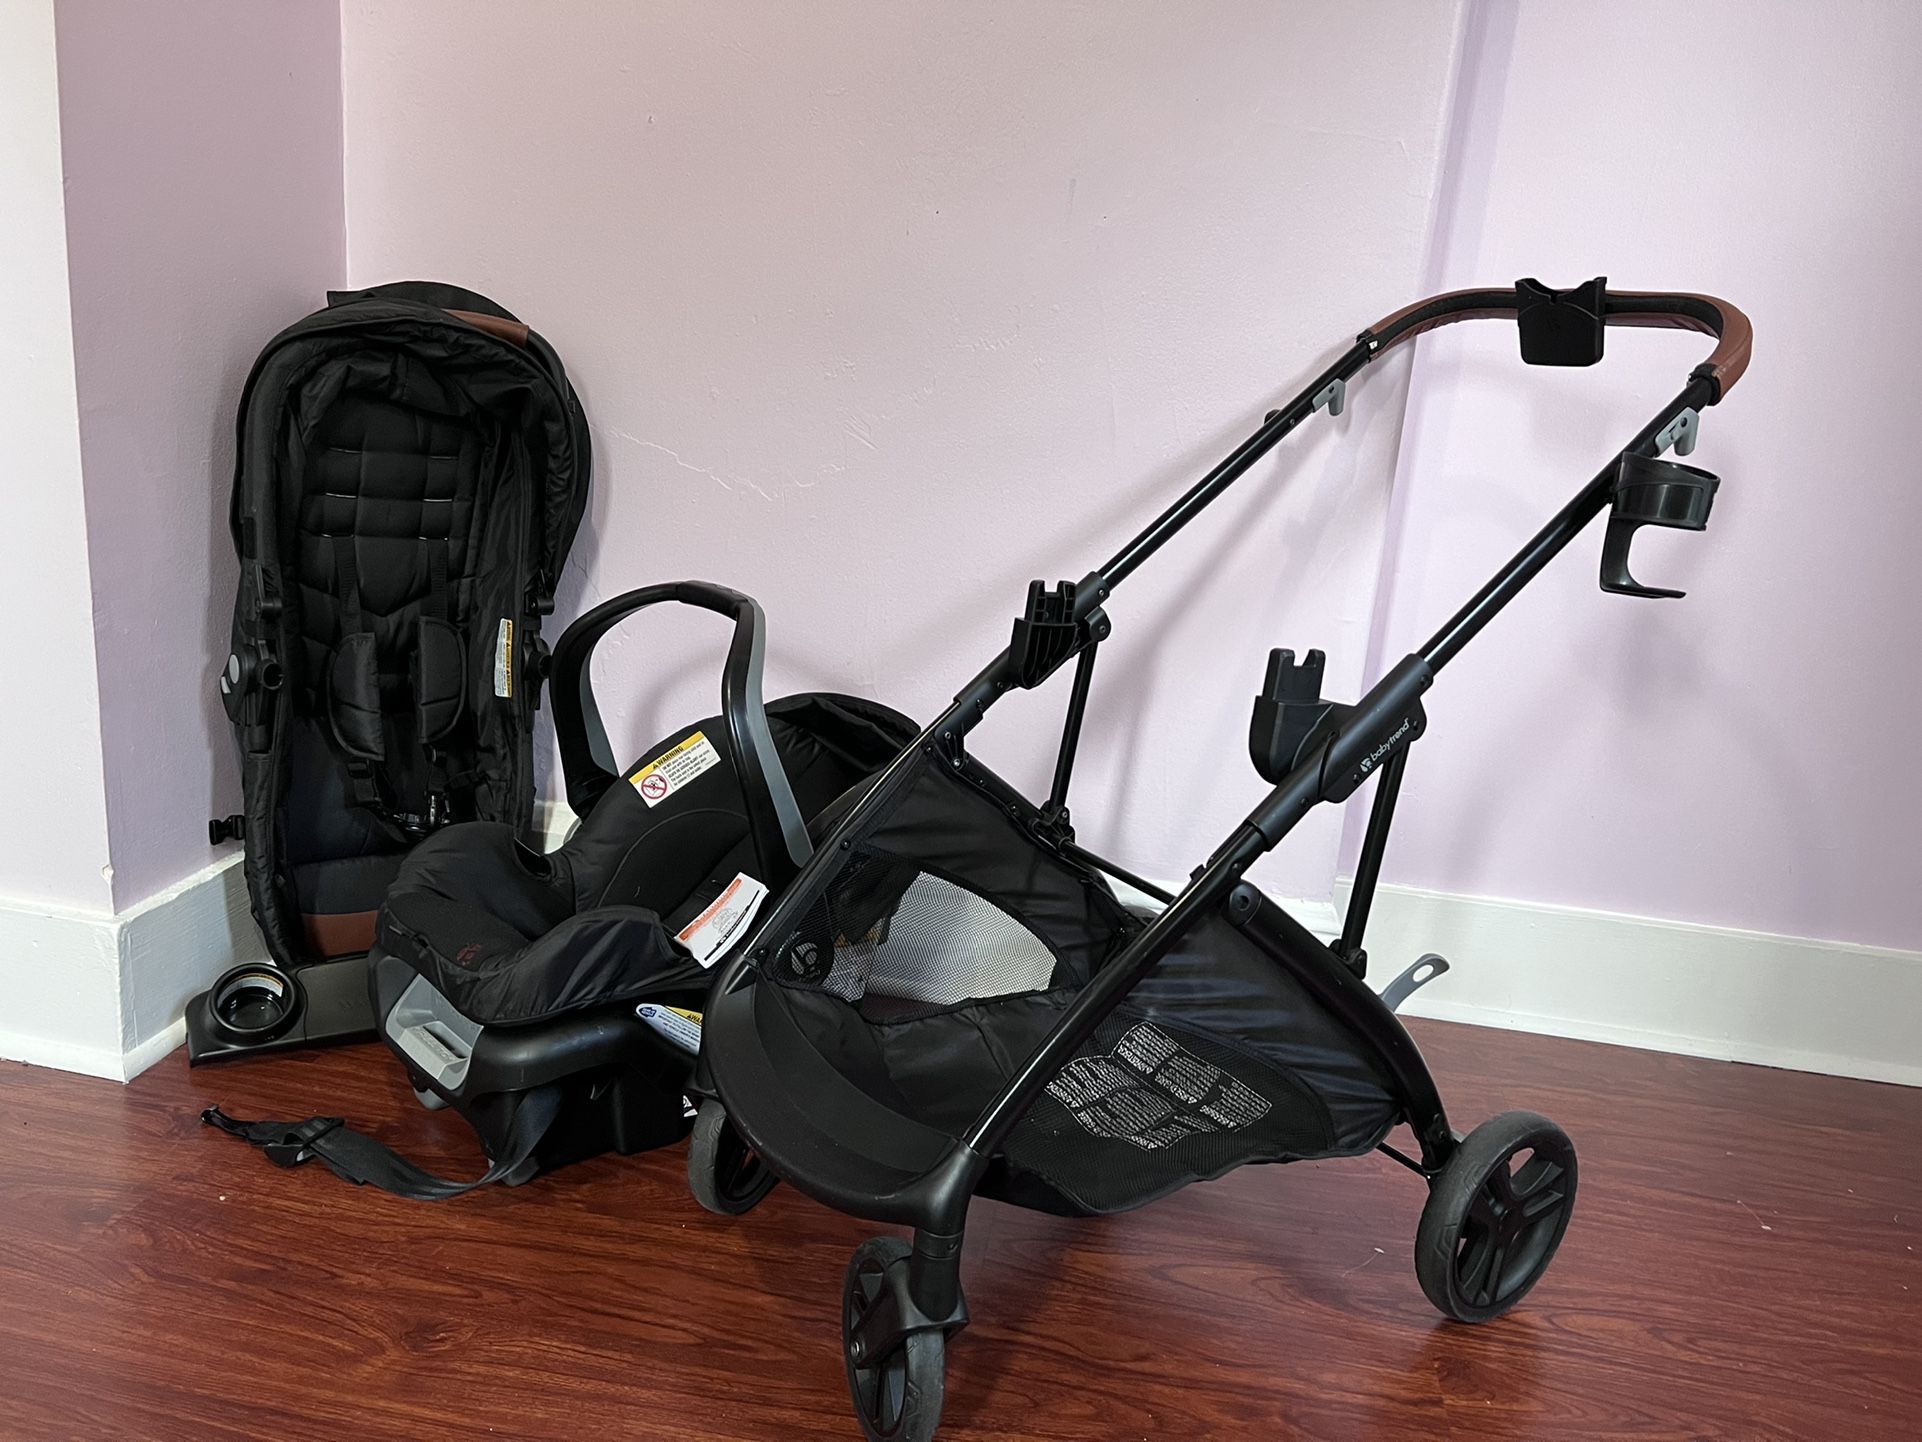 Babytrend Stroller, Bassinet And Carseat